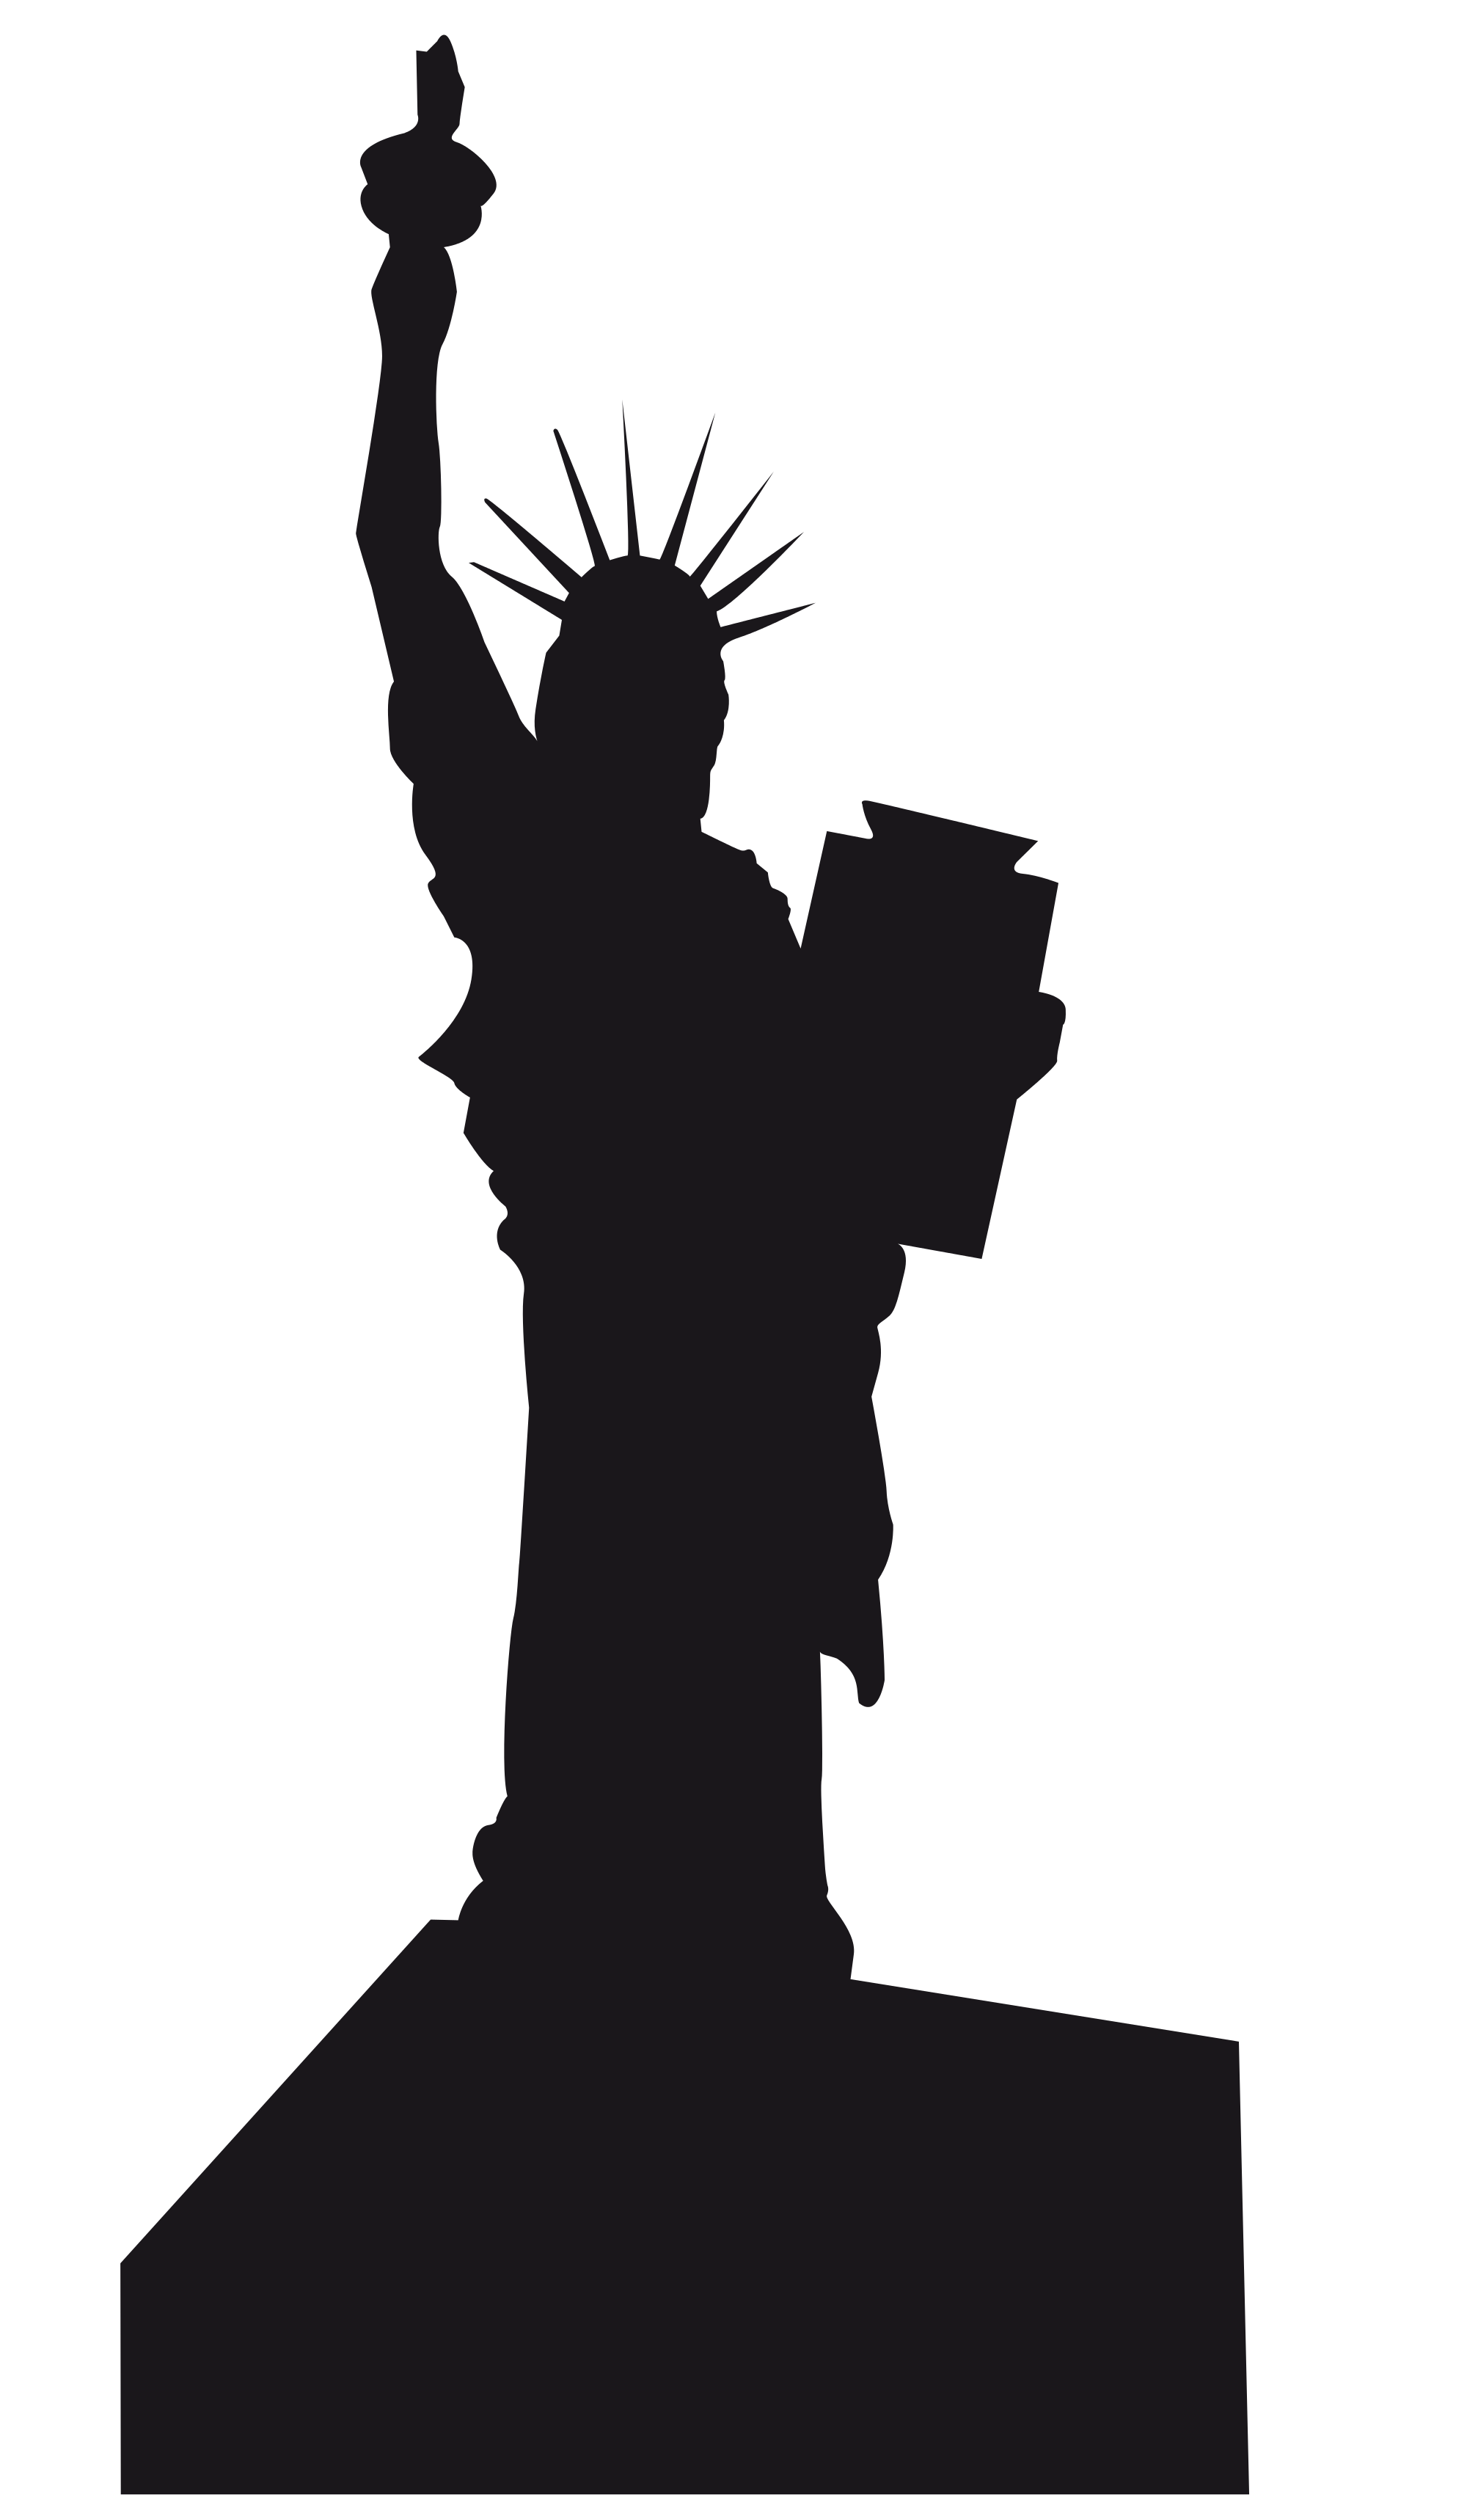 Statue of Liberty Silhouette Scalable Vector Graphics